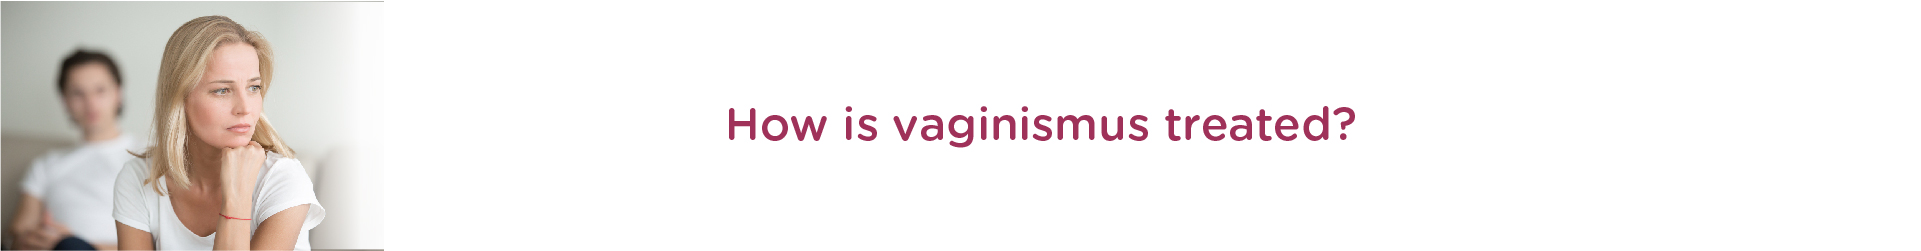 How Is Vaginismus Treated?